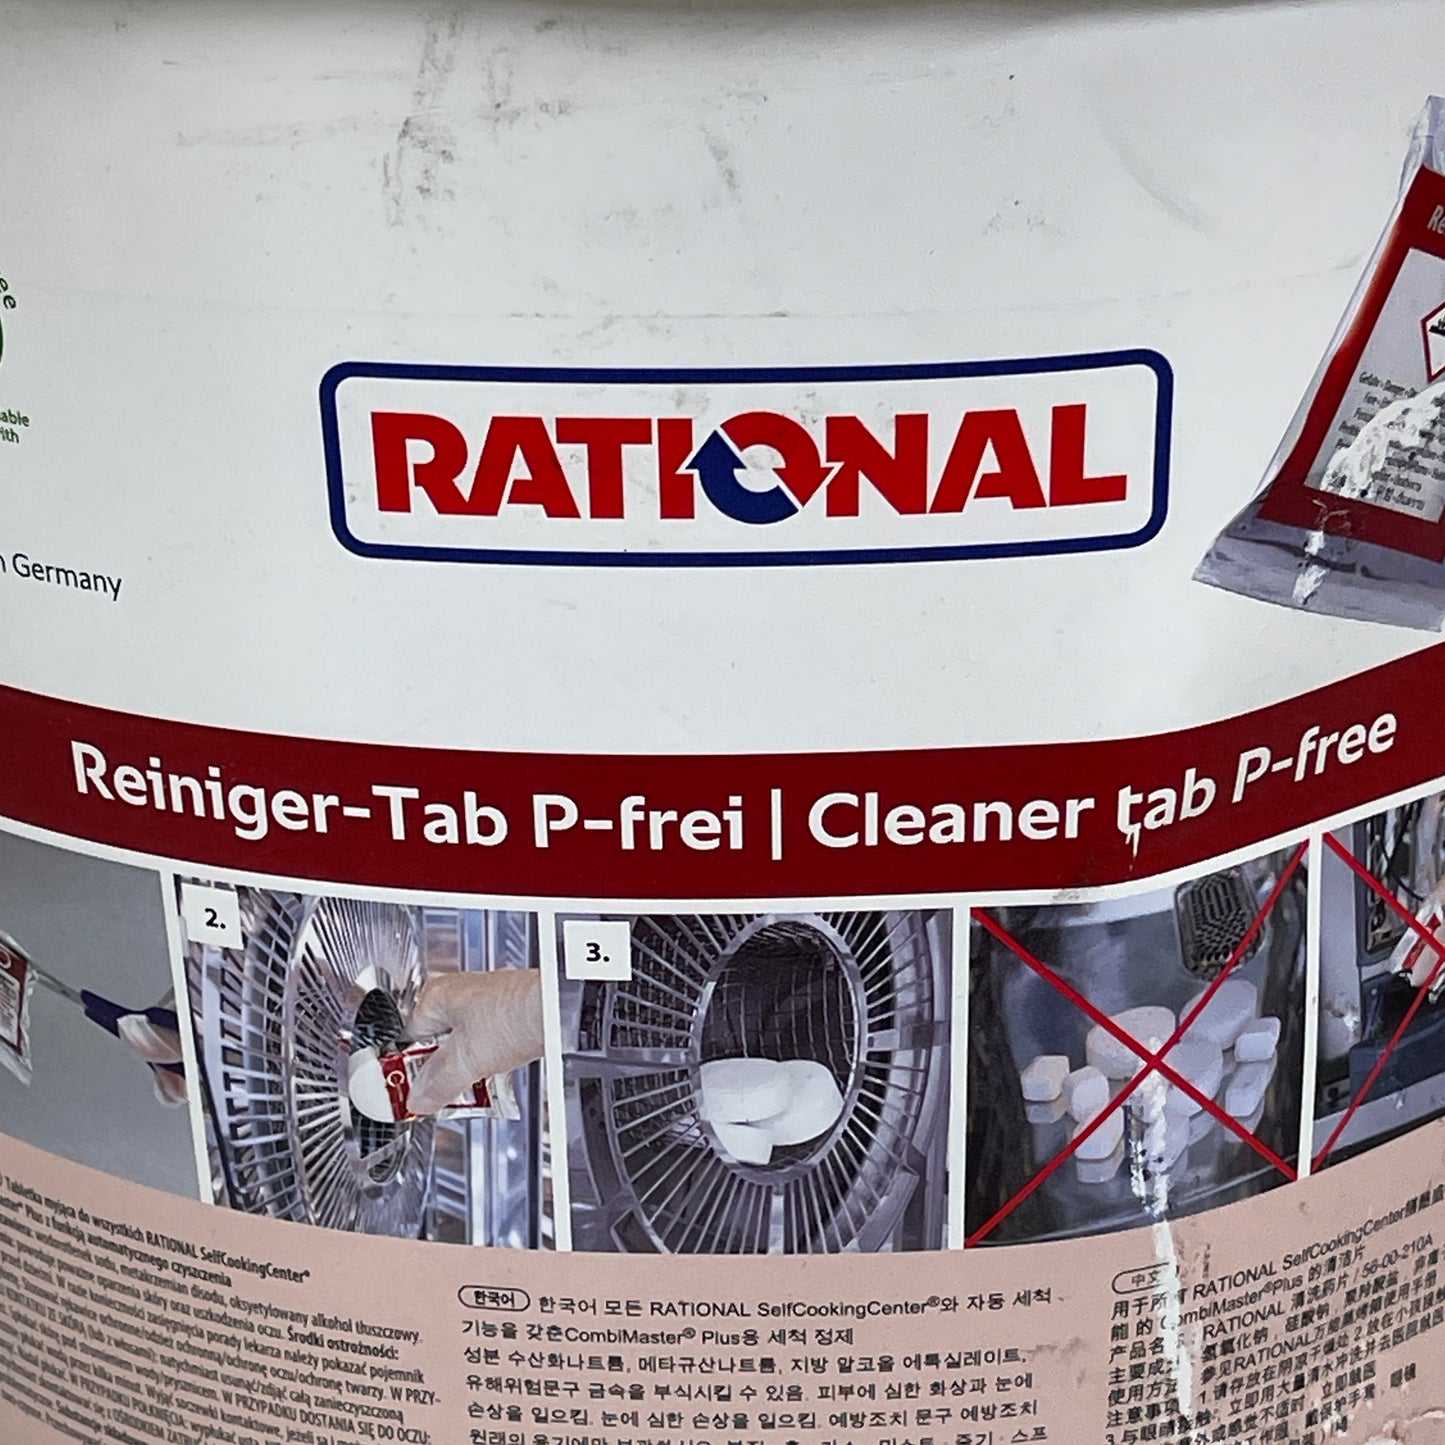 RATIONAL 100 Cleaning Tablets Reiniger-Tab Cleaner-Tab 56.00.210A 03/25 (New Other)